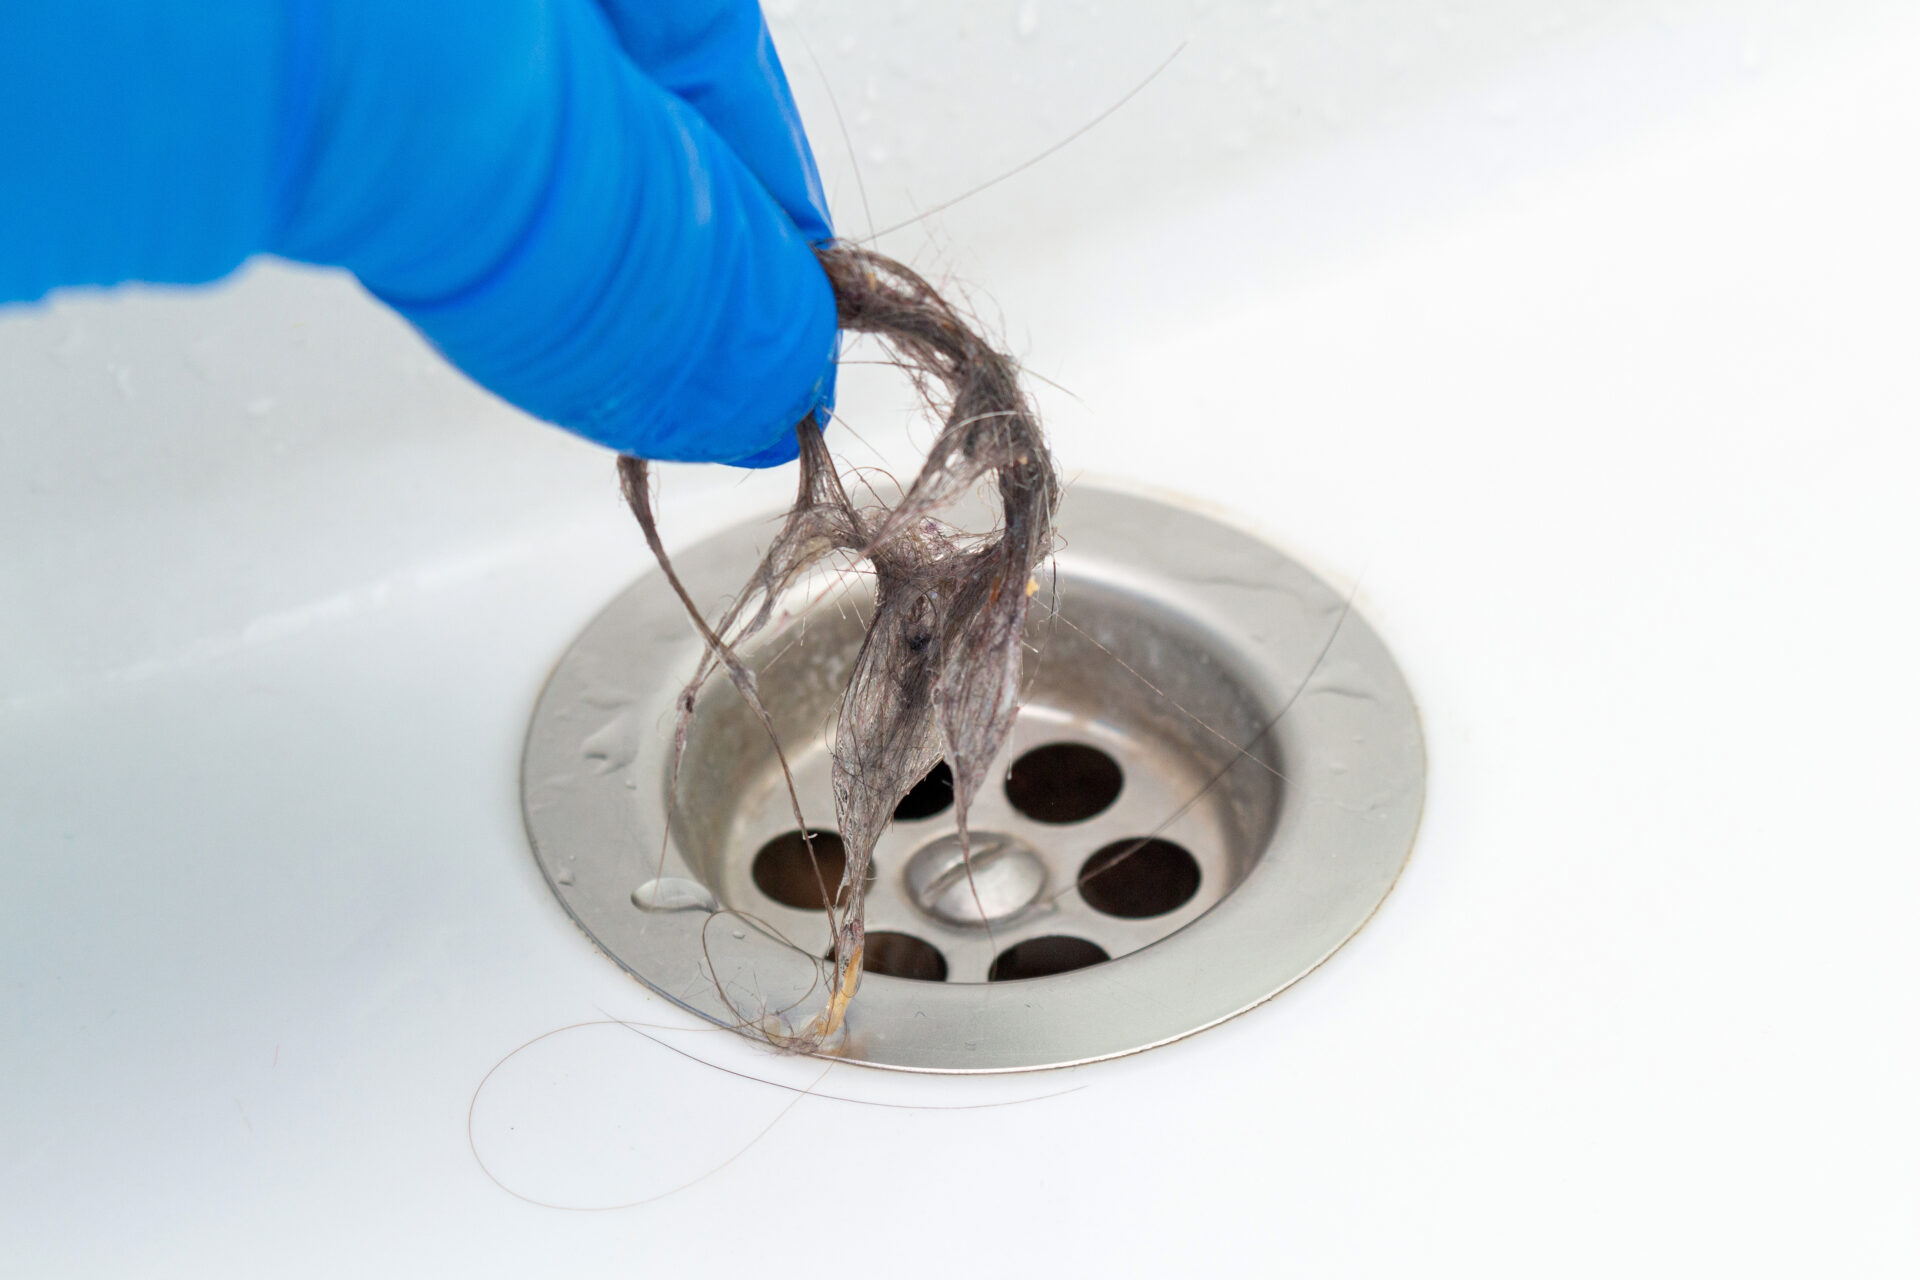 Hand in glove cleaning a clogged drain in the sink or bathtub from hair. MidCity Plumbers